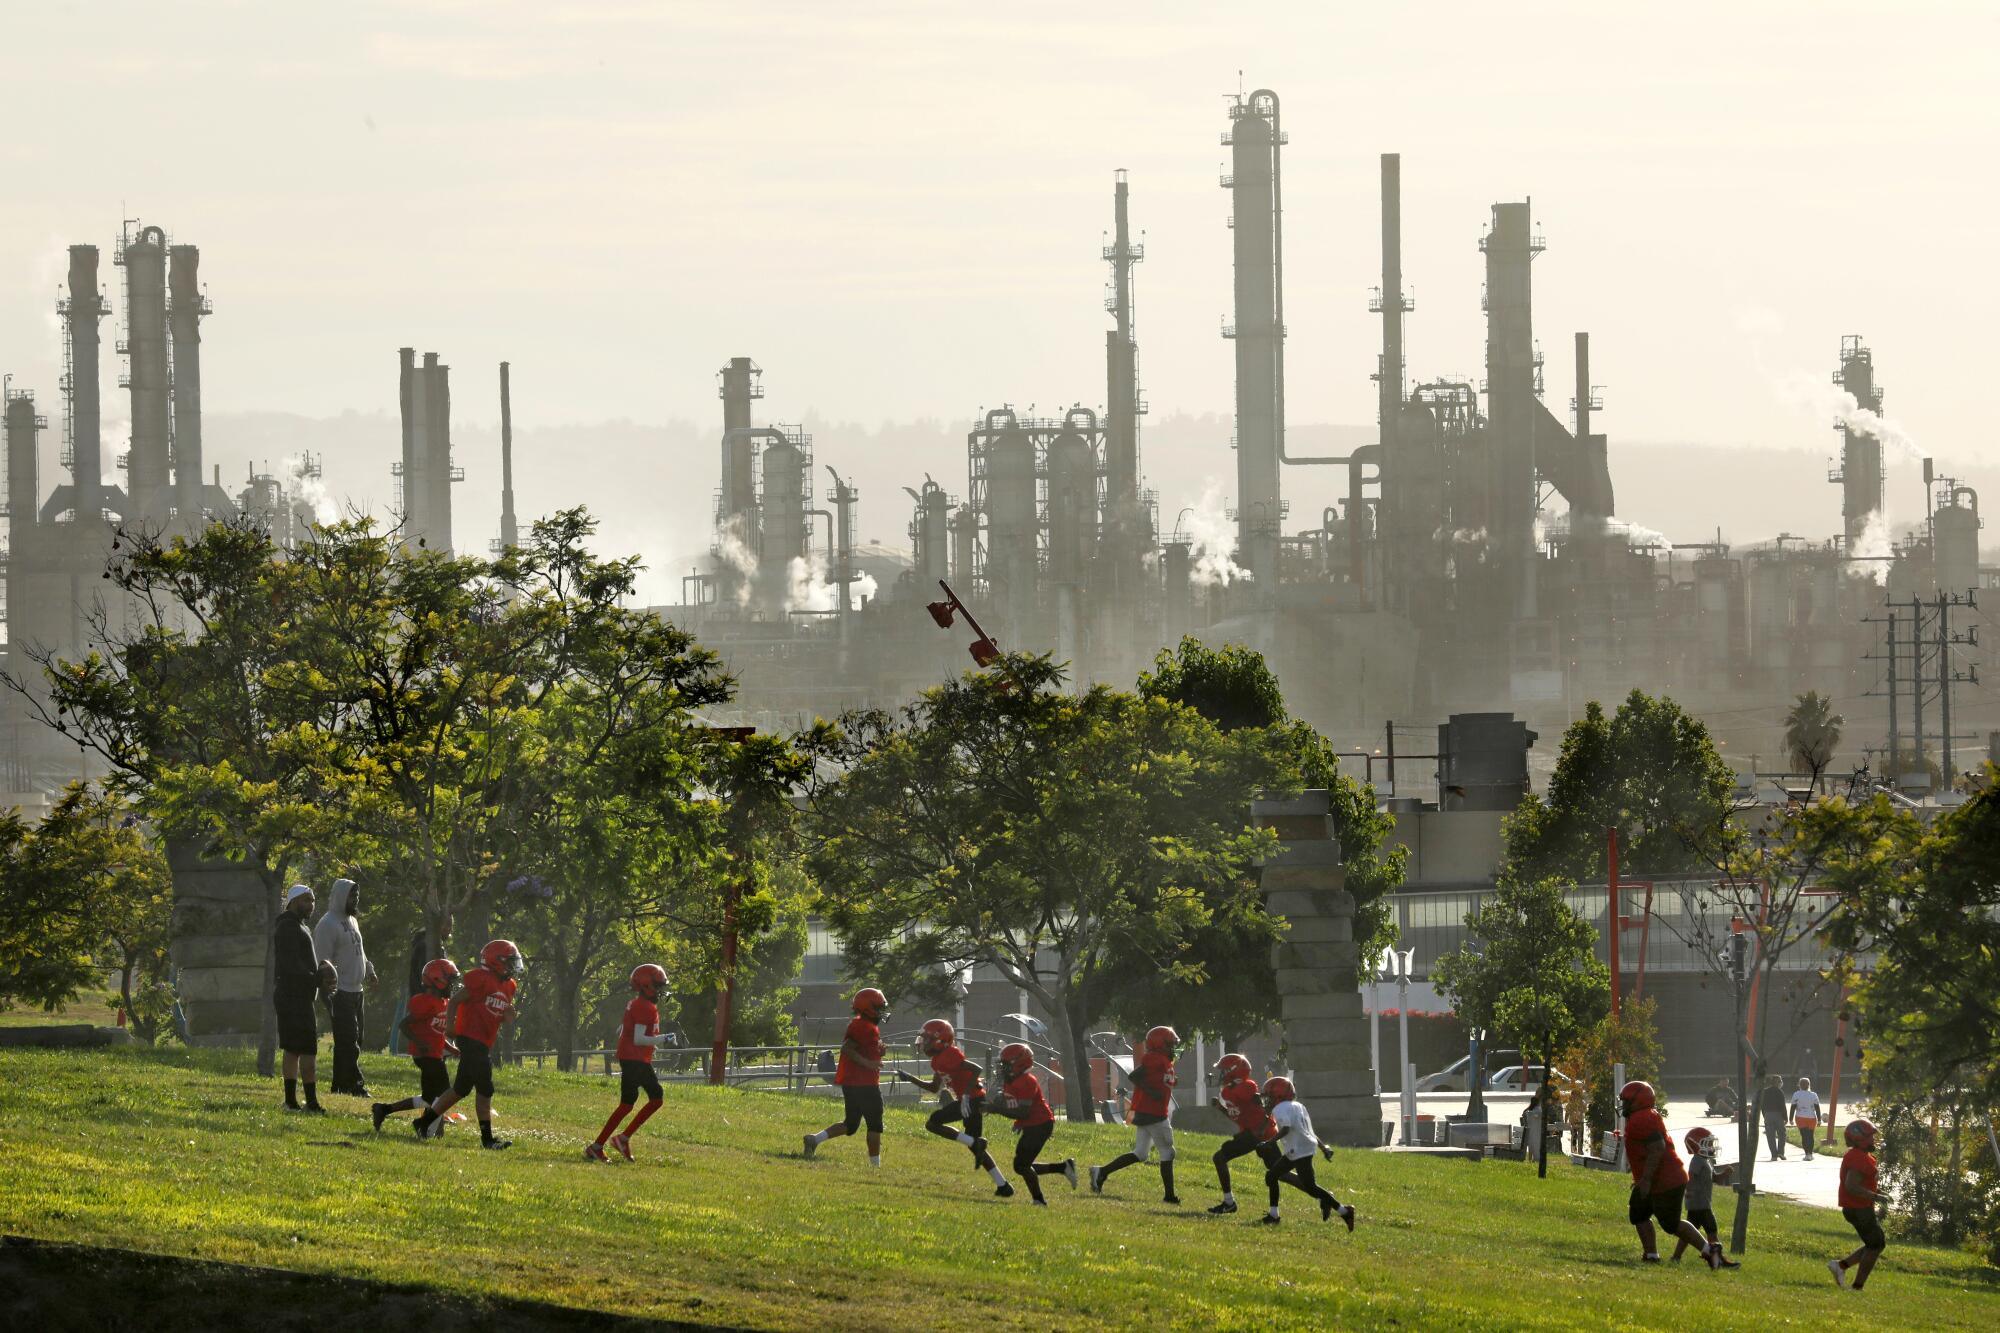 Youth football players train near the Phillip 66 Los Angeles refinery in Wilmington.